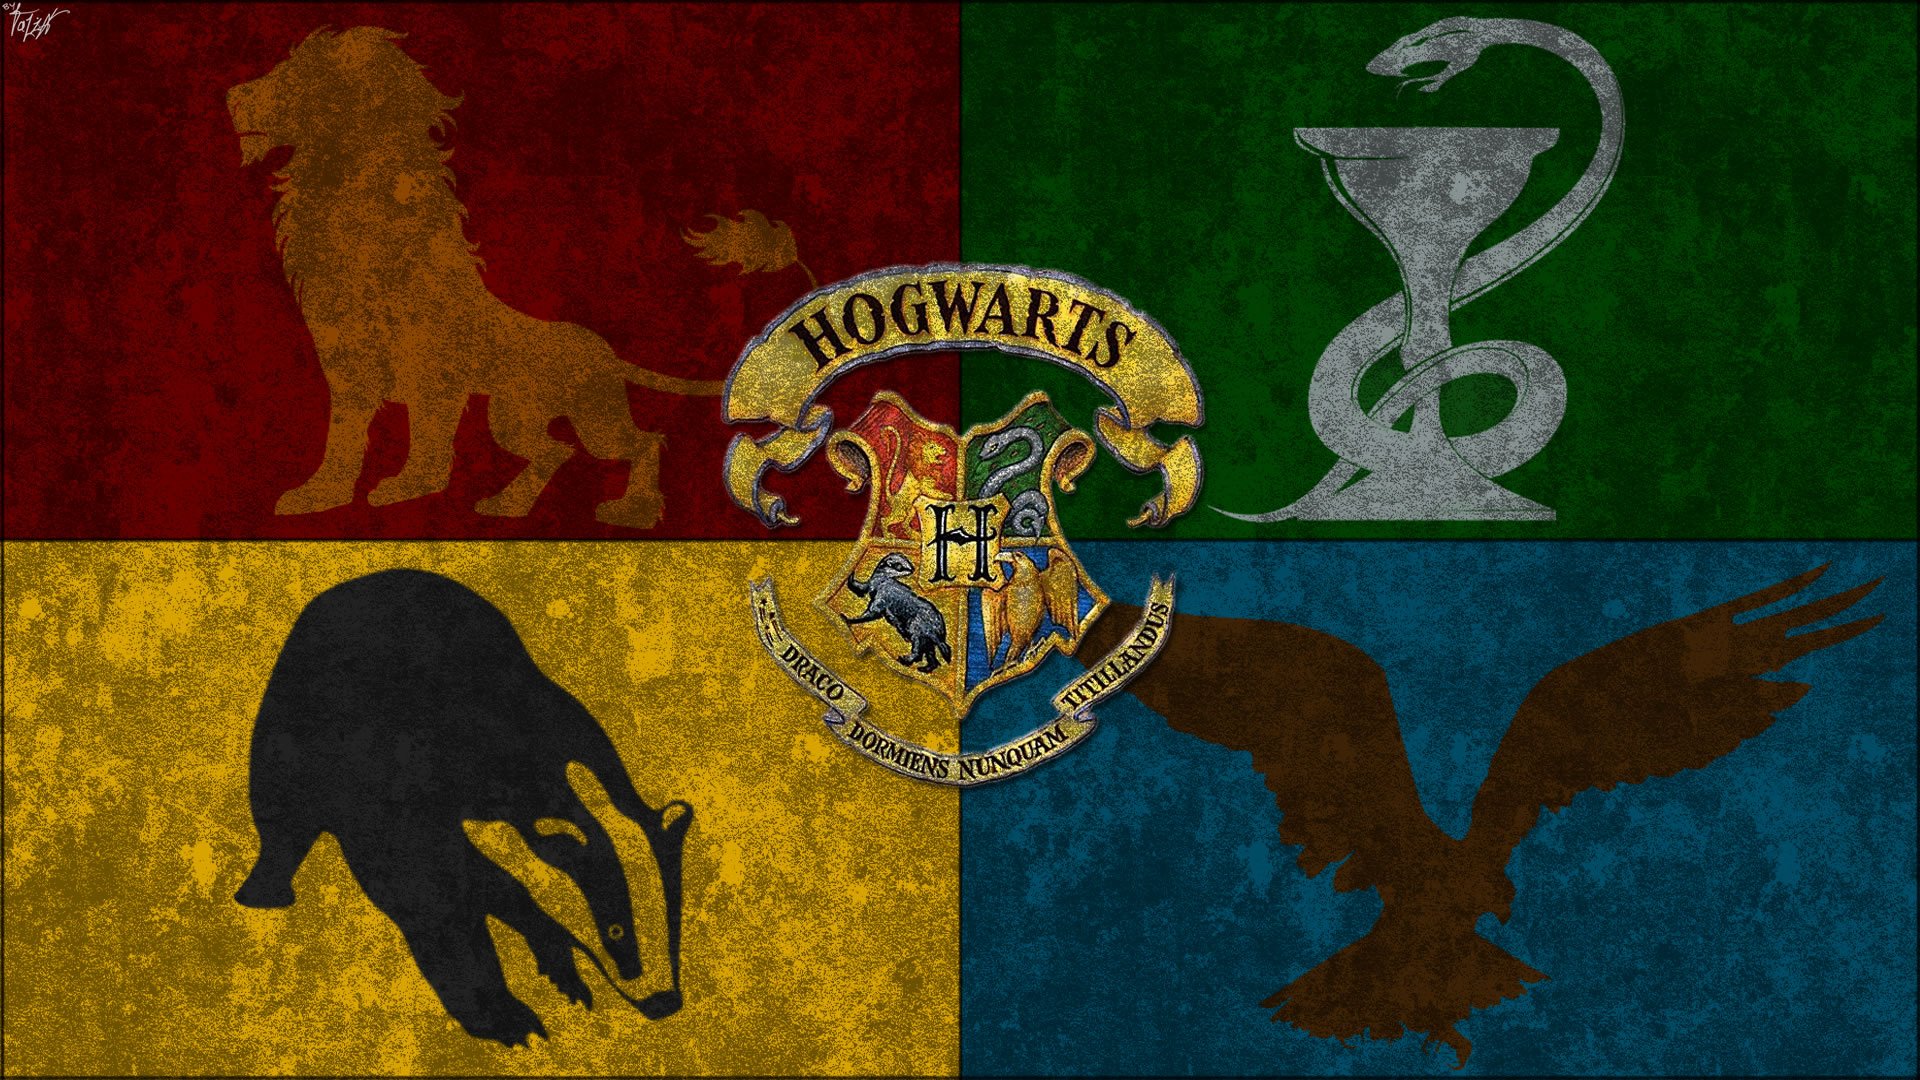 slytherin wallpapers hd stay002 staywallpaper 1920x1080